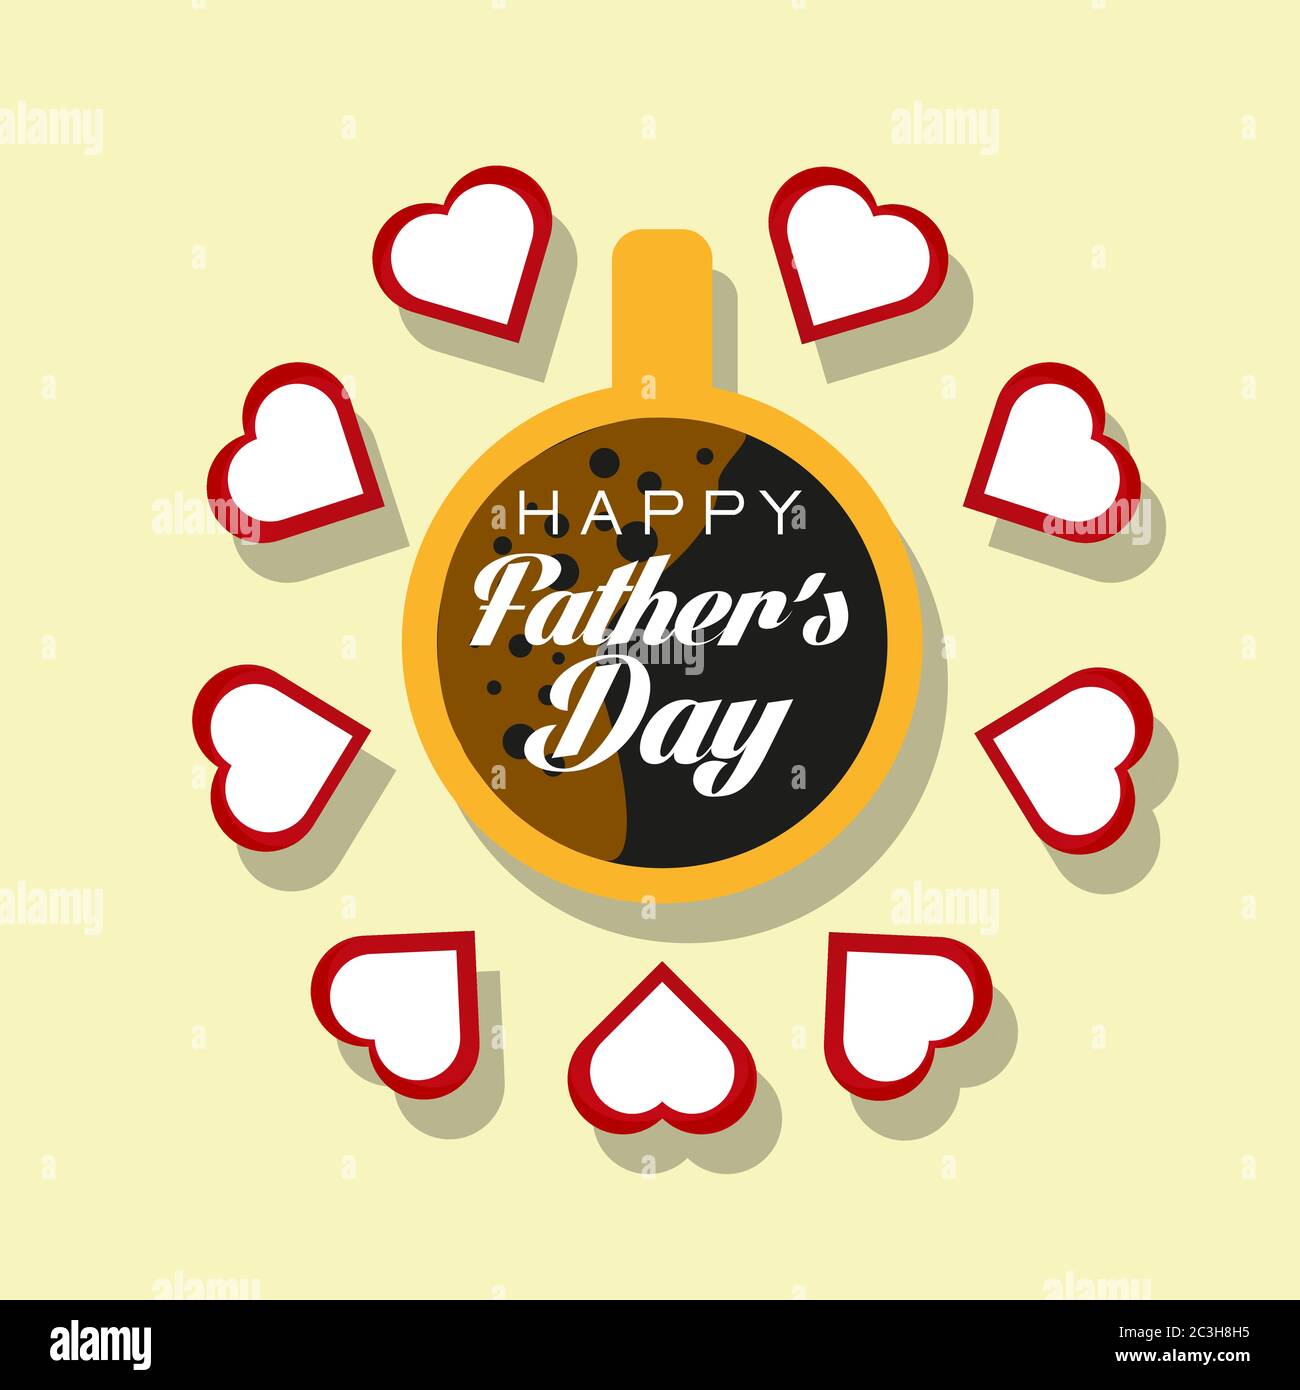 Illustration of cup full of coffee and red colored heart on cream color background. Heart drawings around the glass. Happy fathers day. Stock Vector